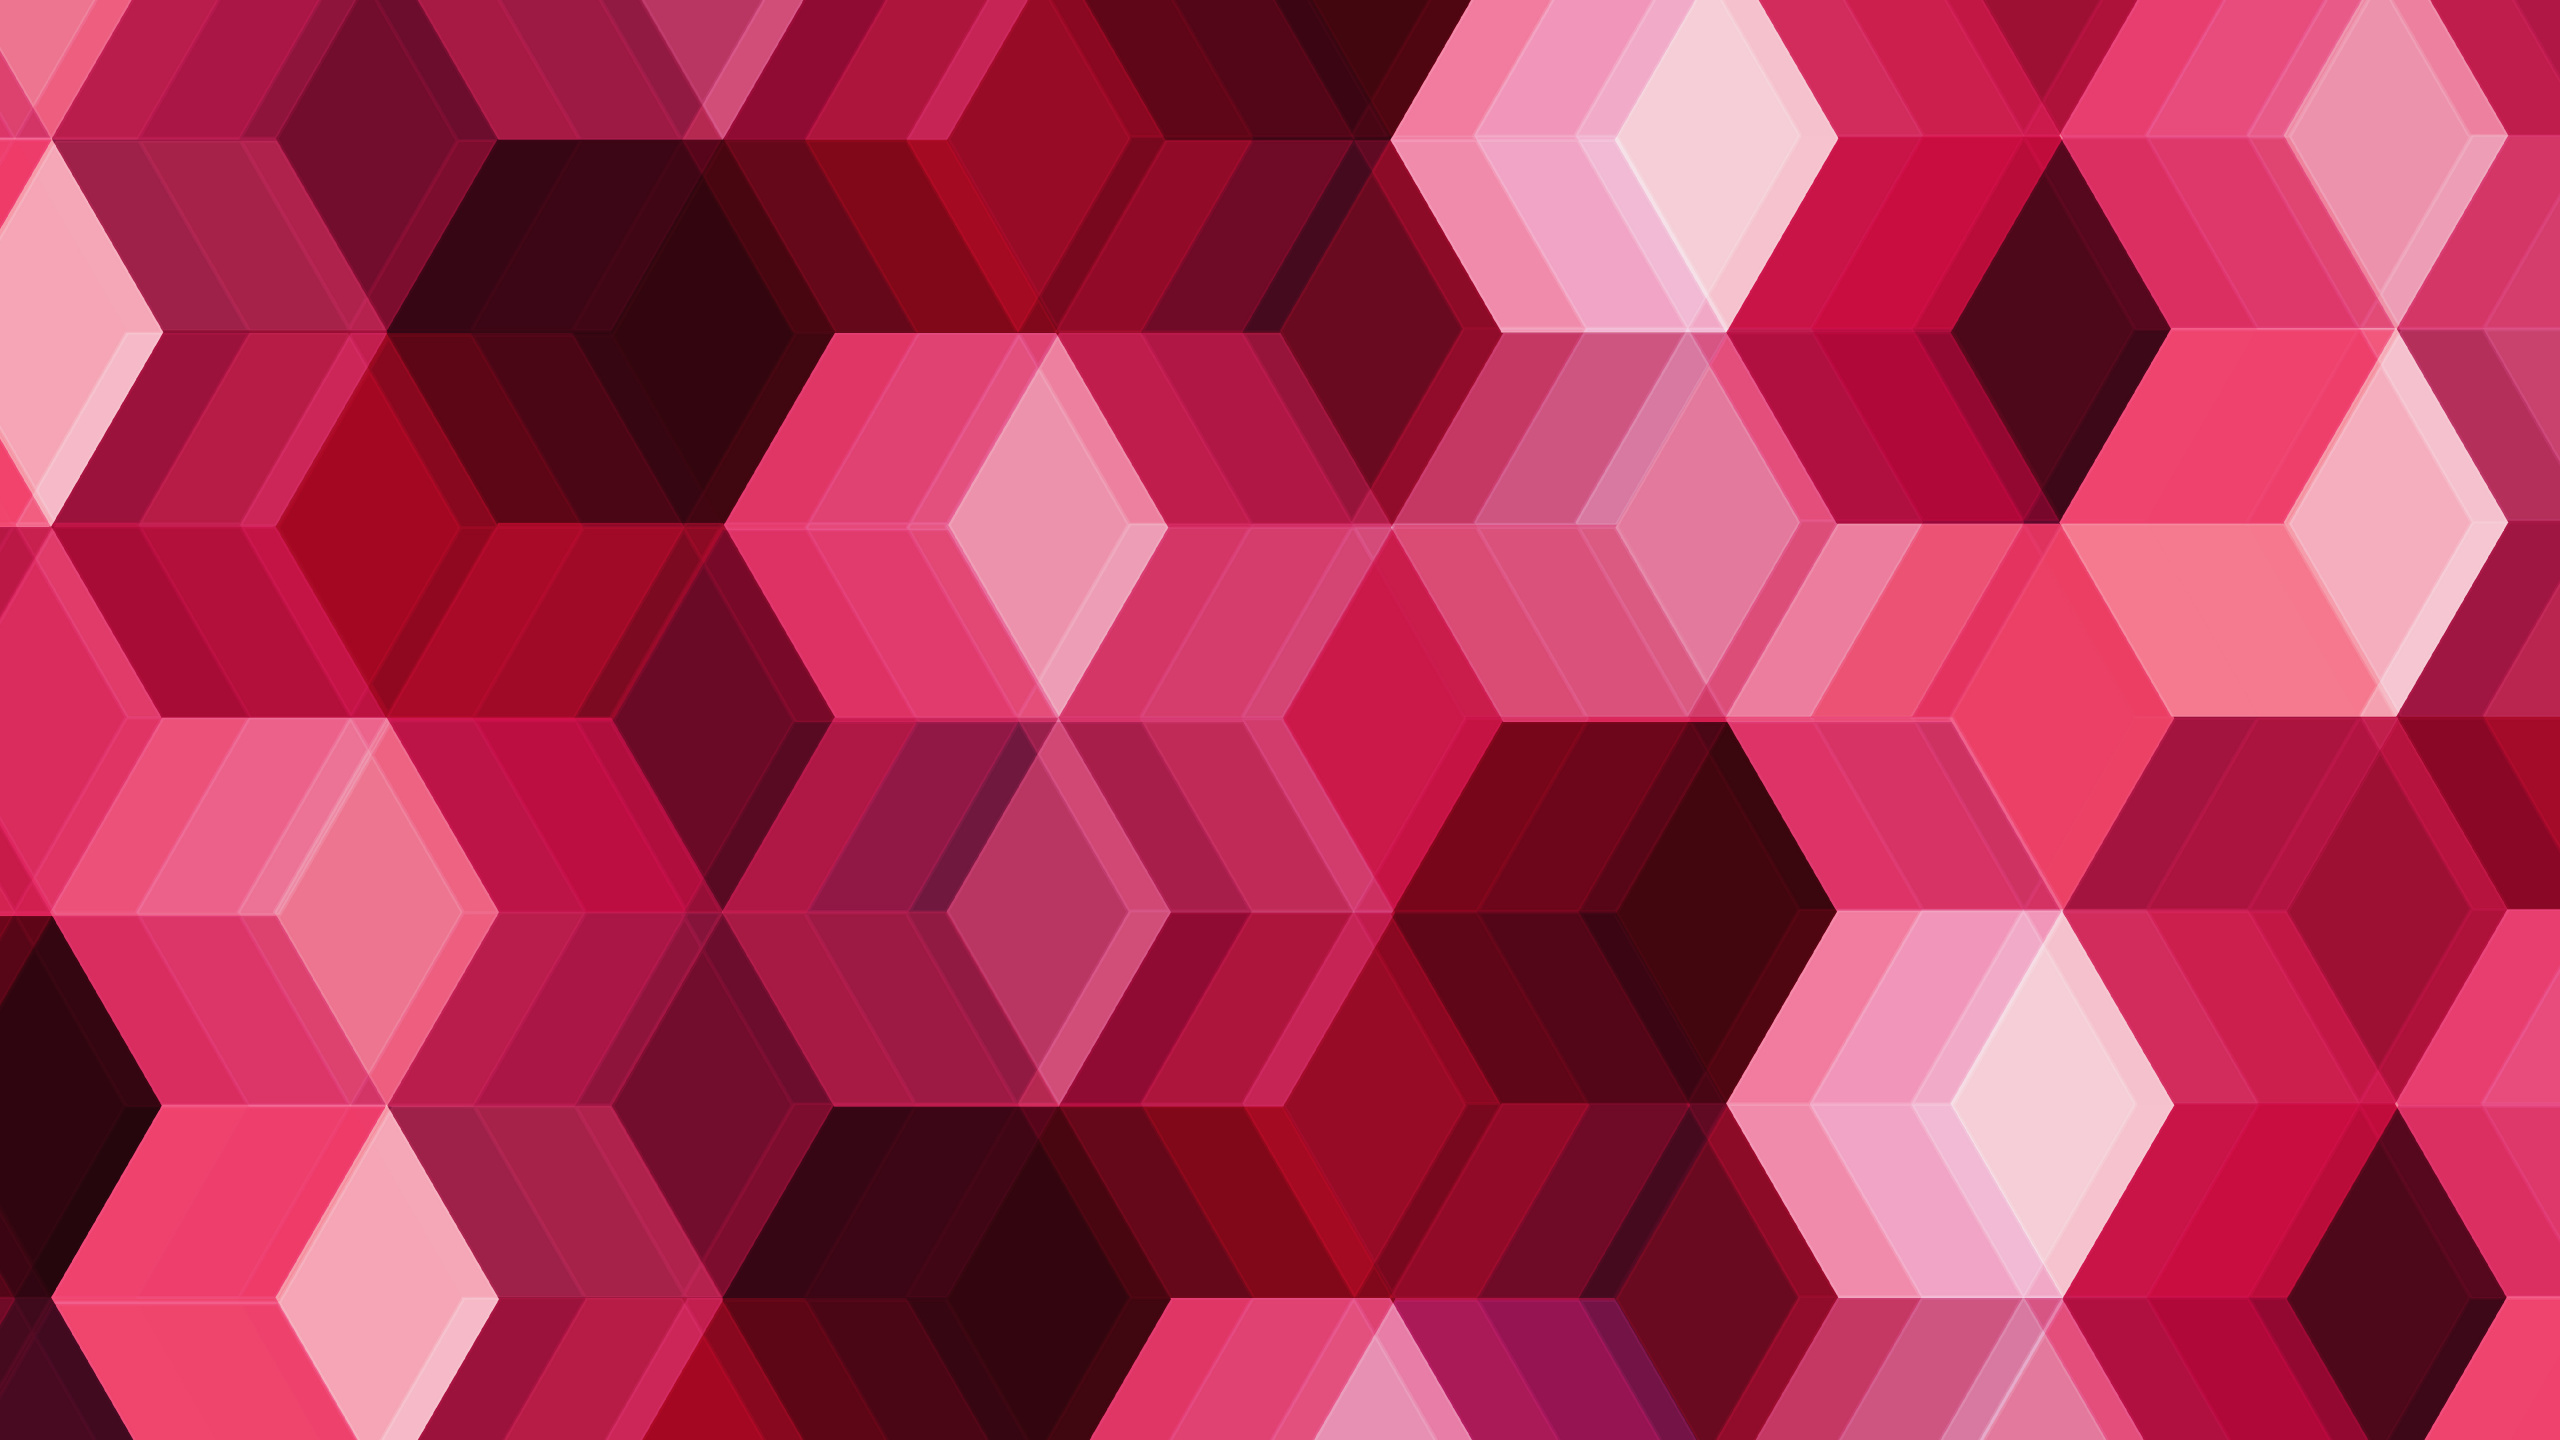 Red and White Checkered Textile. Wallpaper in 2560x1440 Resolution